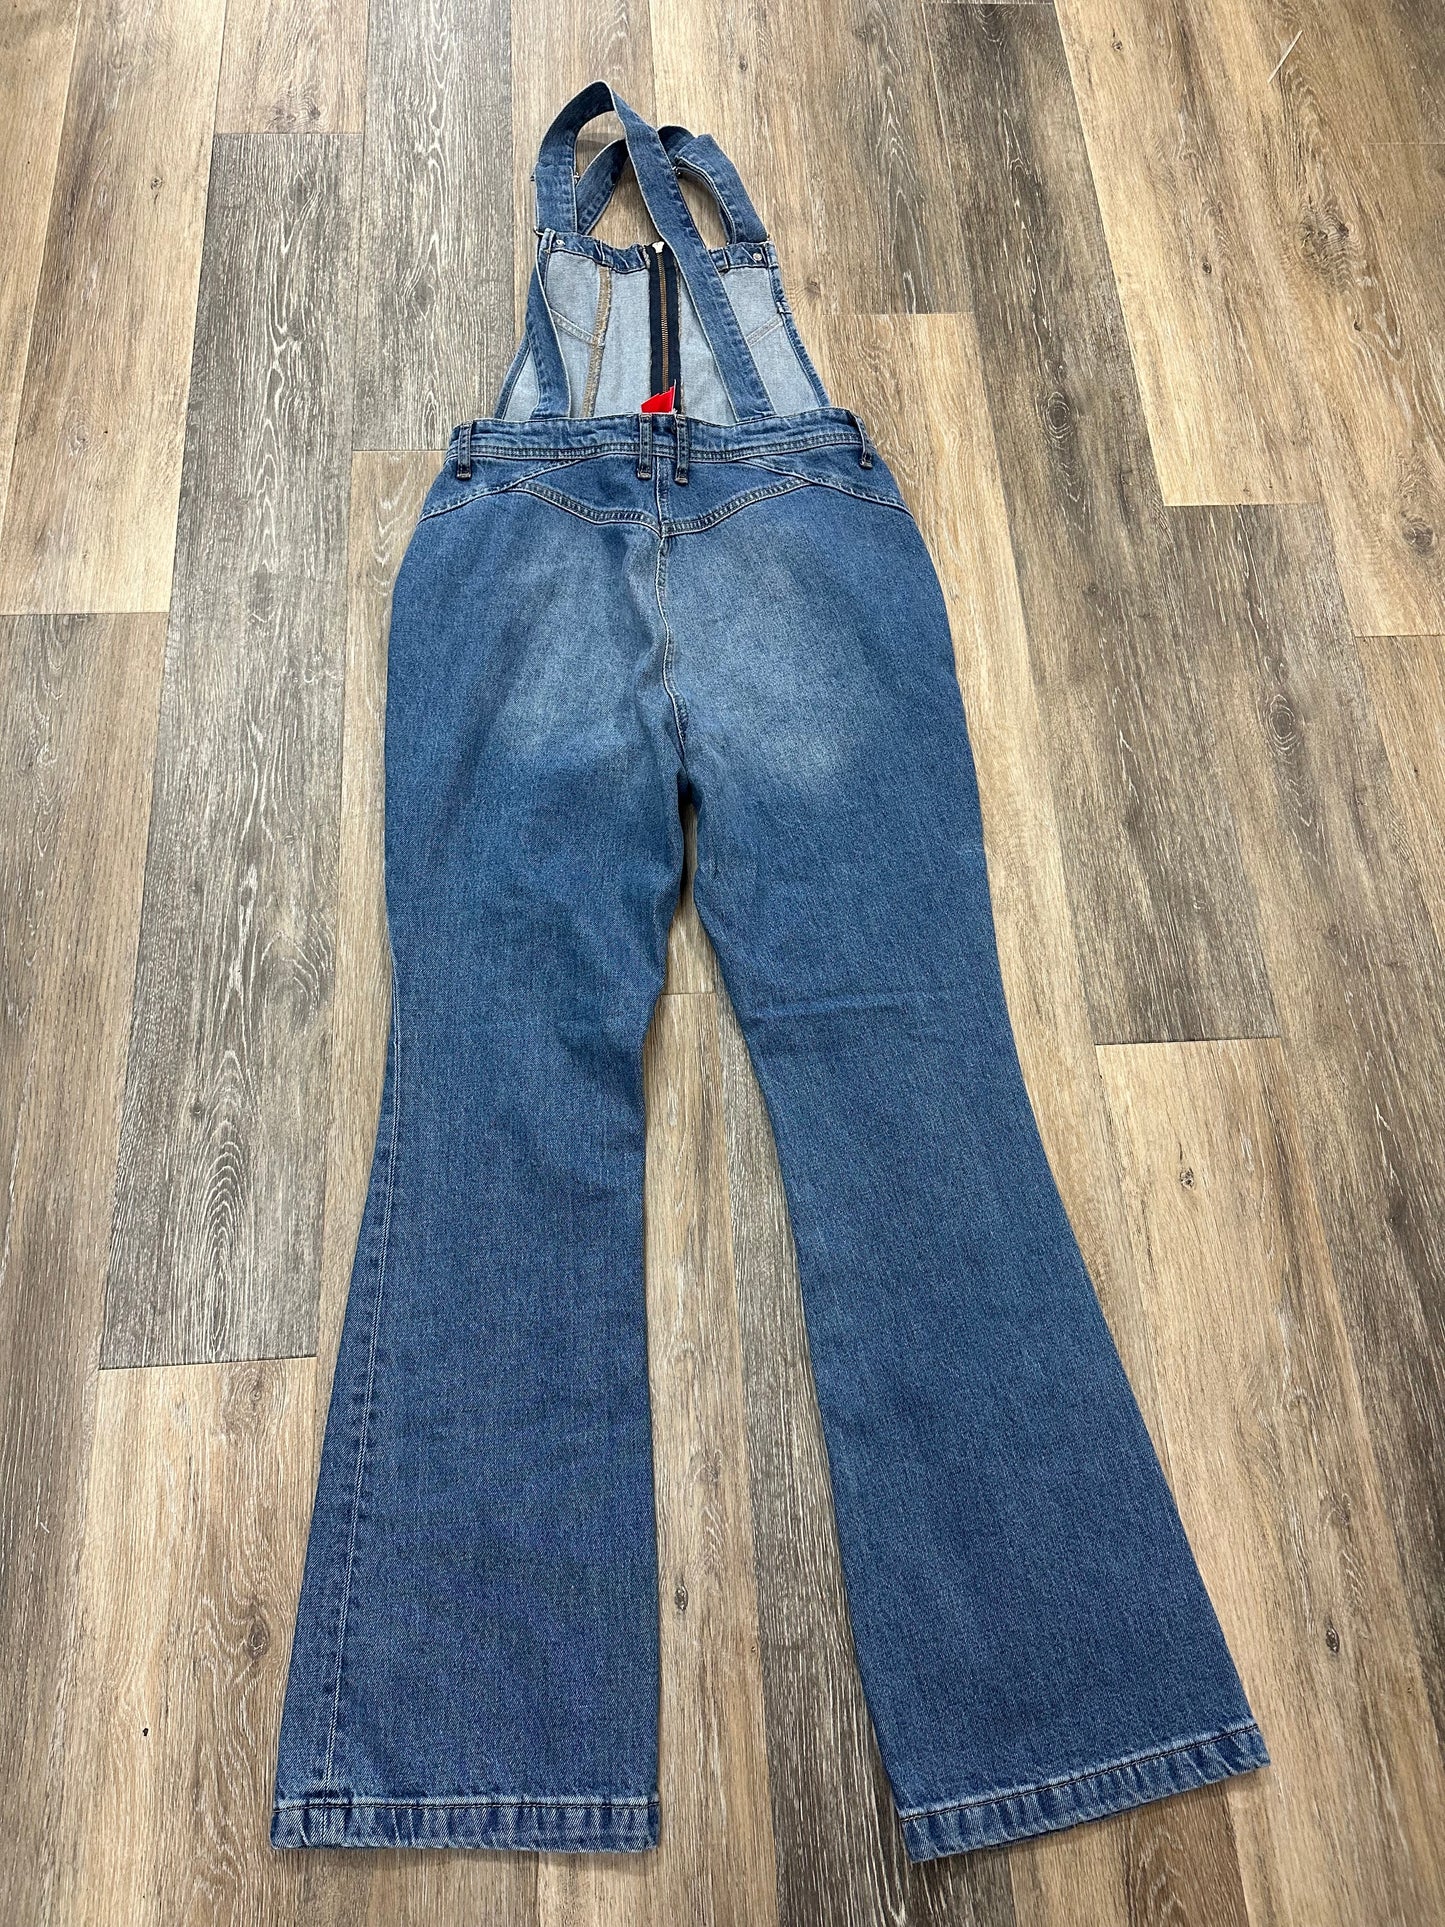 Overalls By We The Free  Size: L